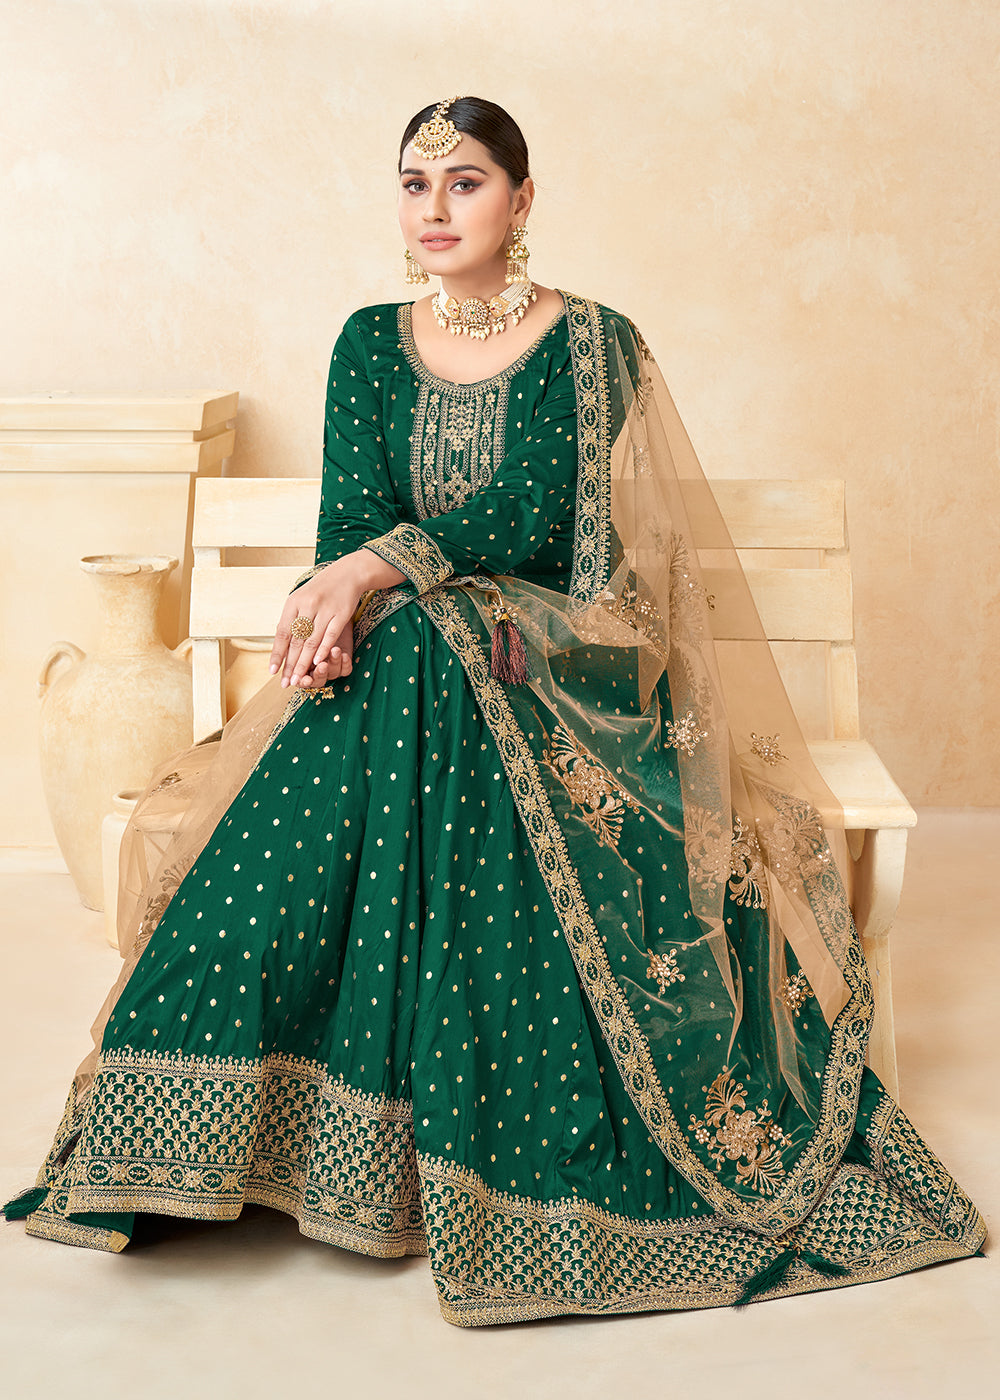 Buy Now Green Silk Embroidered Indian Ethnic Wear Anarkali Dress Online in USA, UK, Australia, New Zealand, Canada & Worldwide at Empress Clothing. 